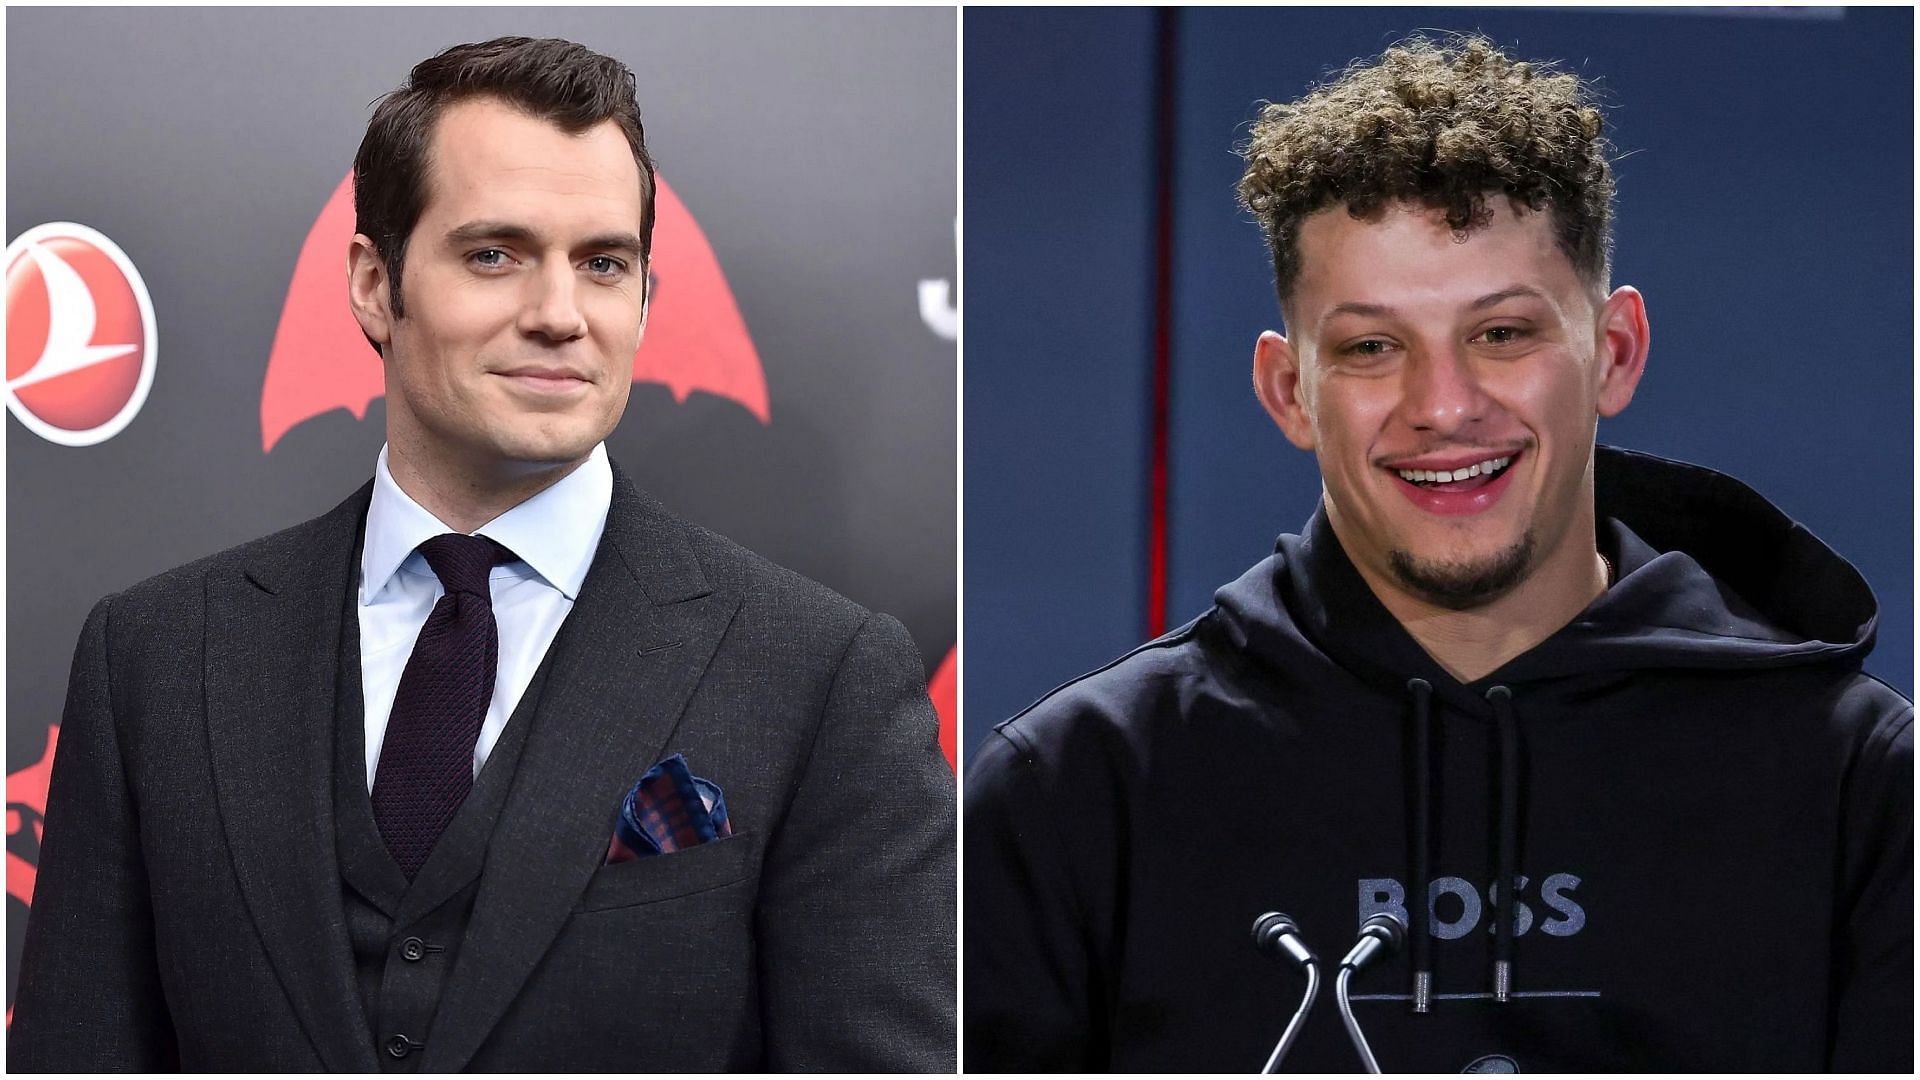 Henry Cavill became a fan of the Chiefs and Mahomes from his Superman days